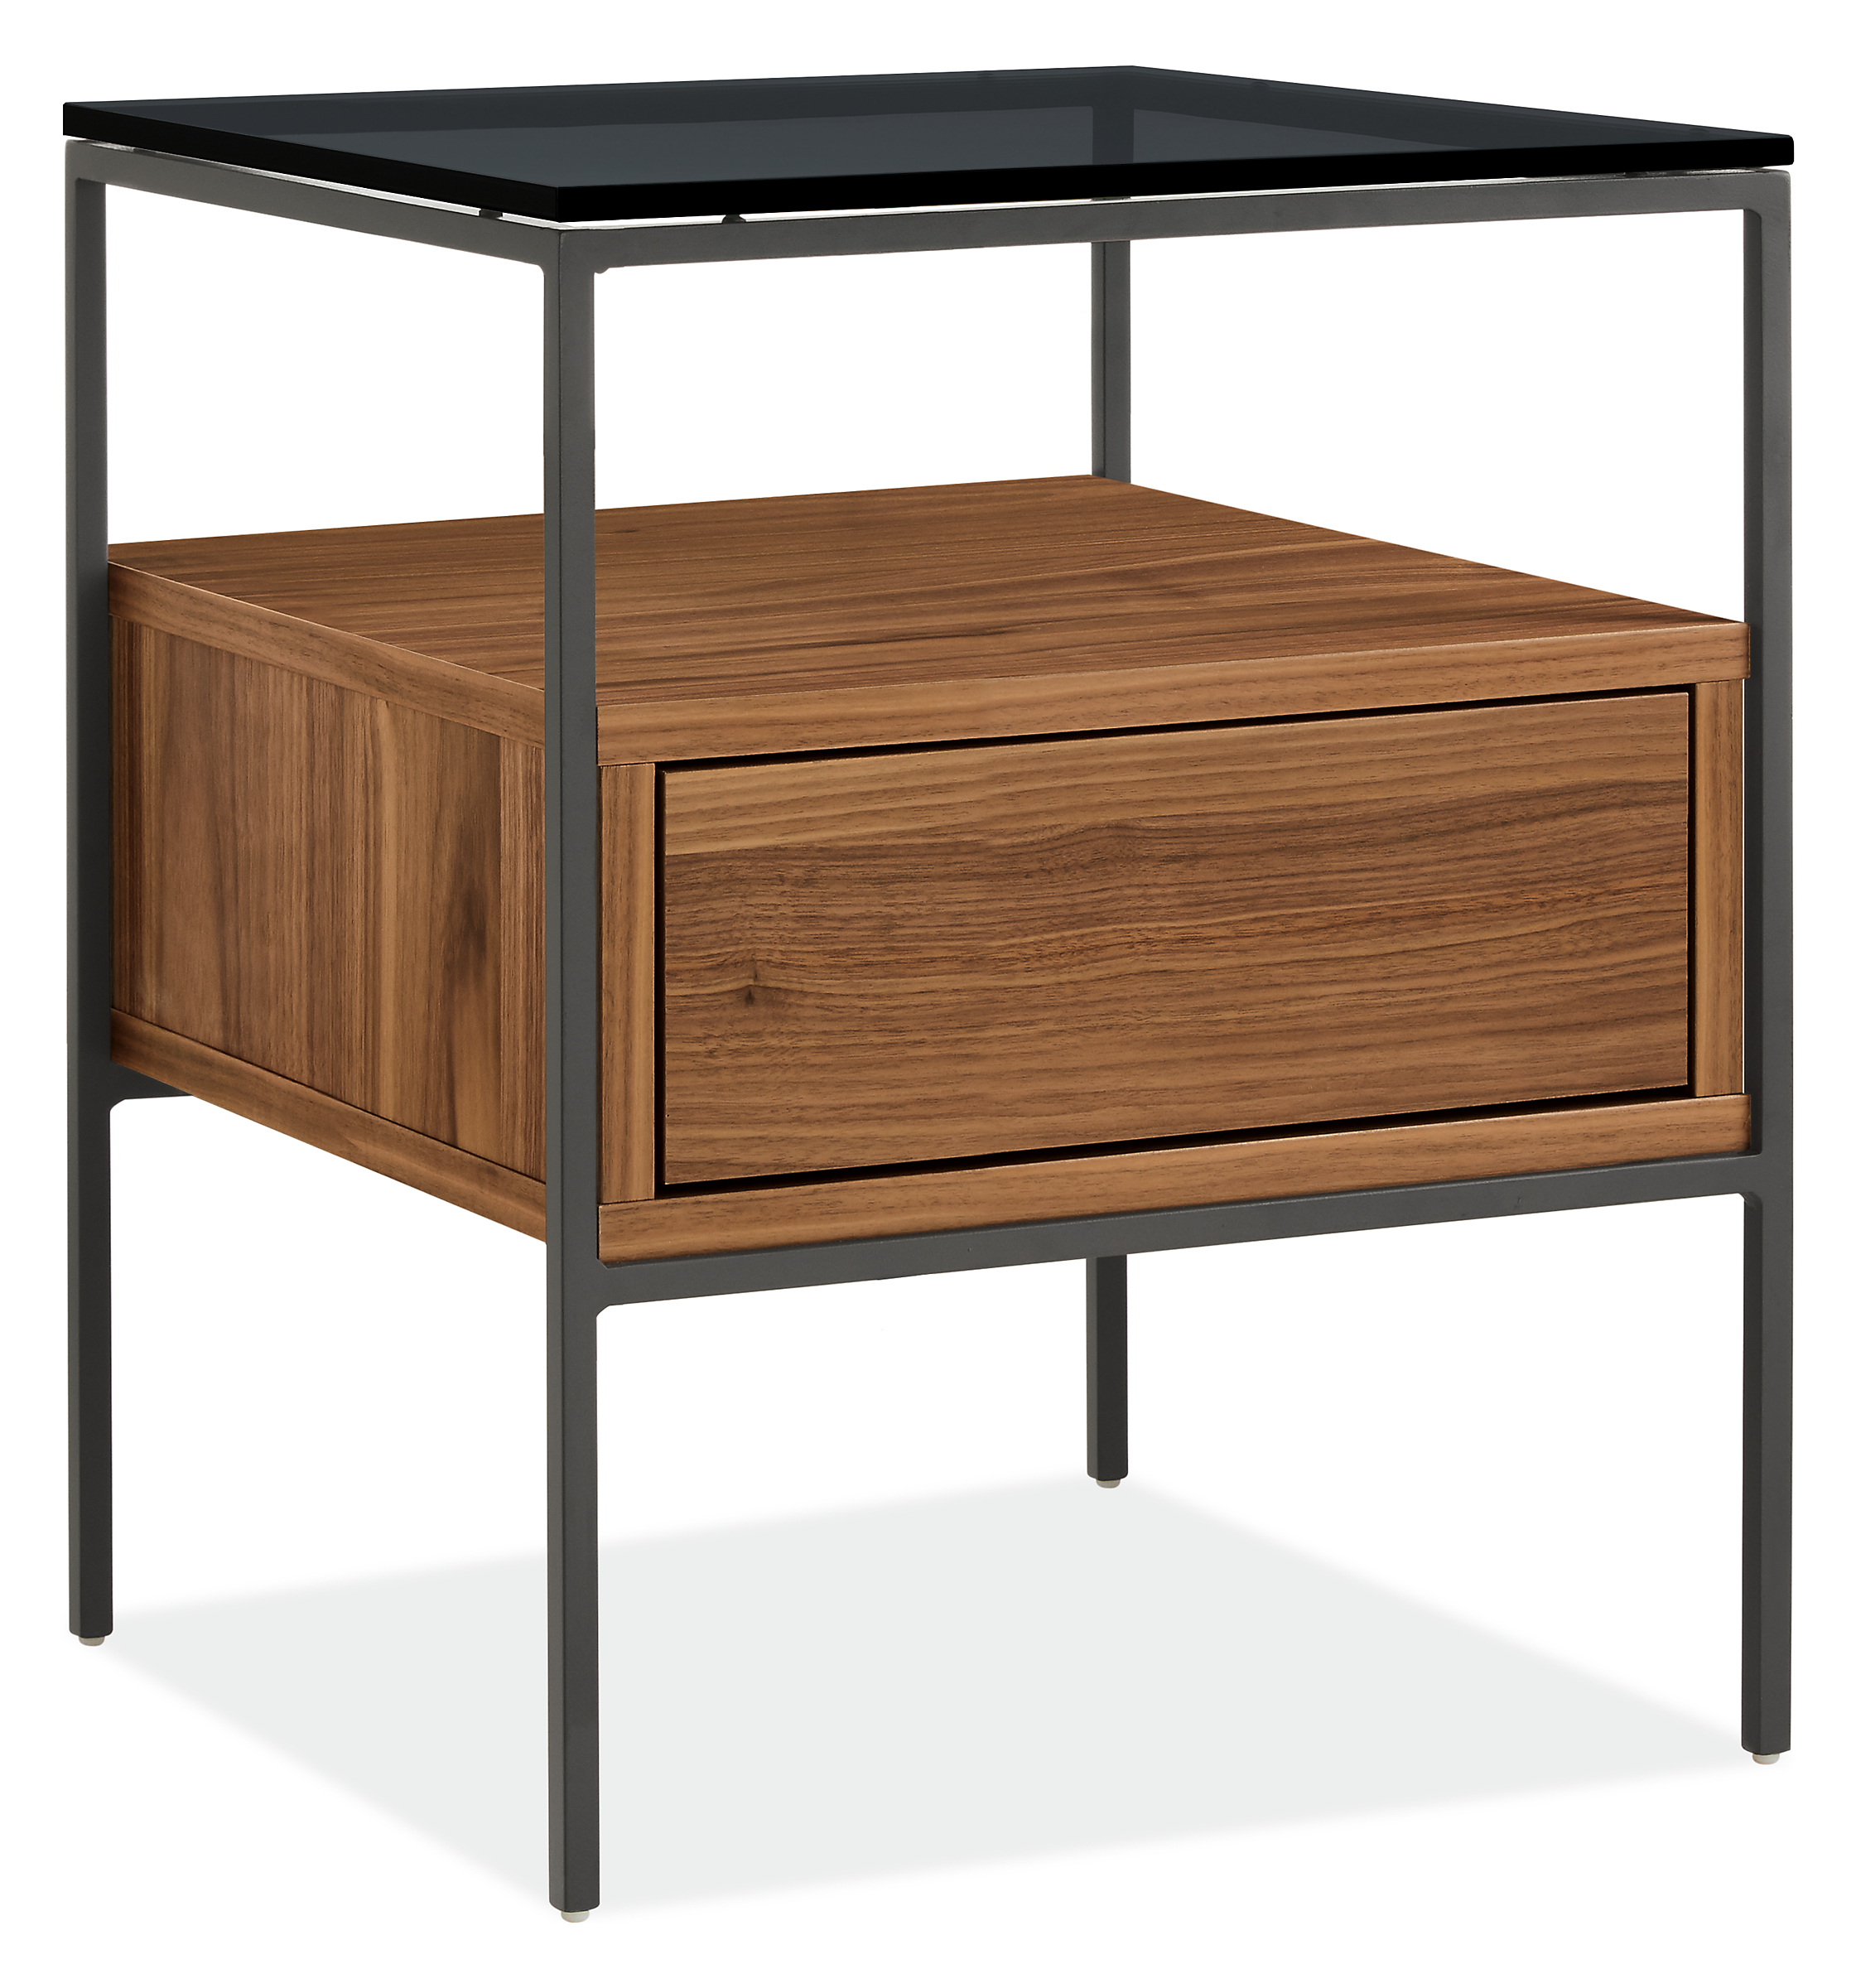 Williams 18w 18d 22h End Table